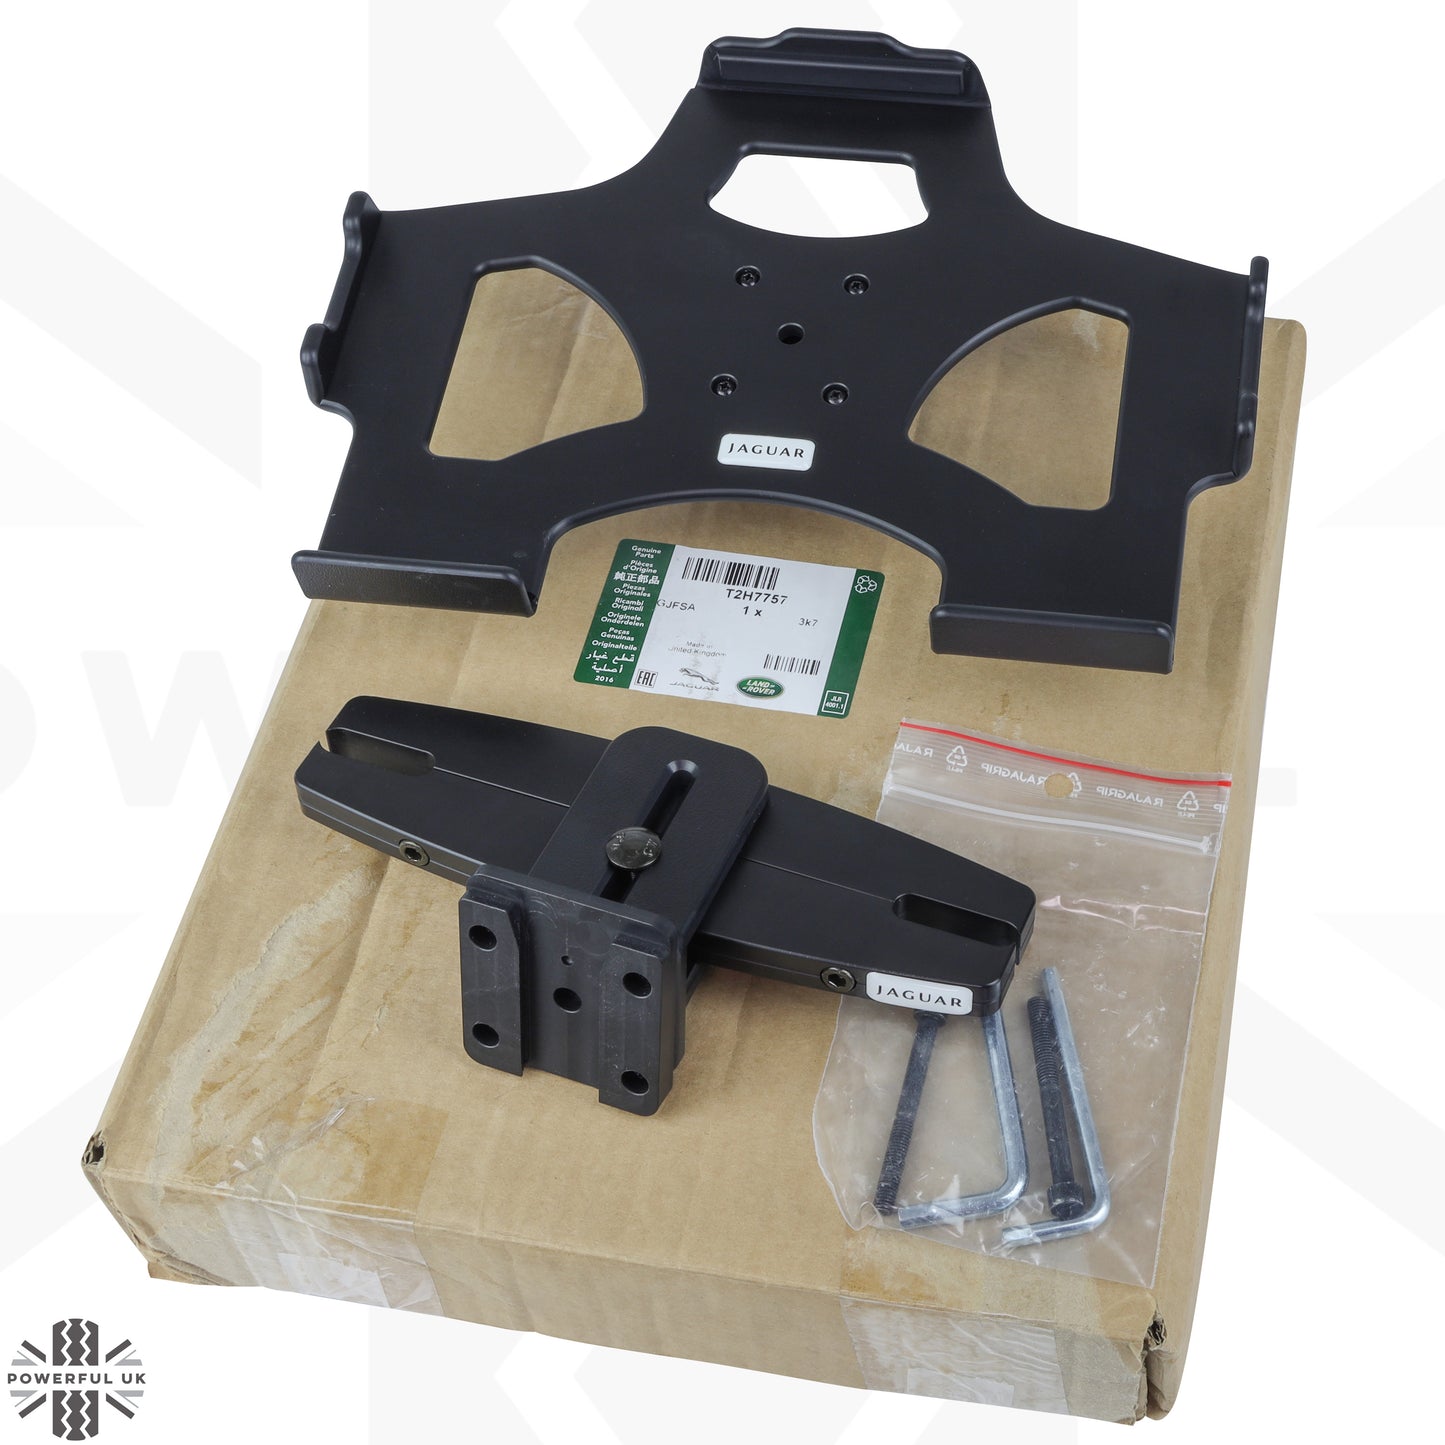 Headrest Mount iPad 2-4 Holder for Land Rover Discovery Sport